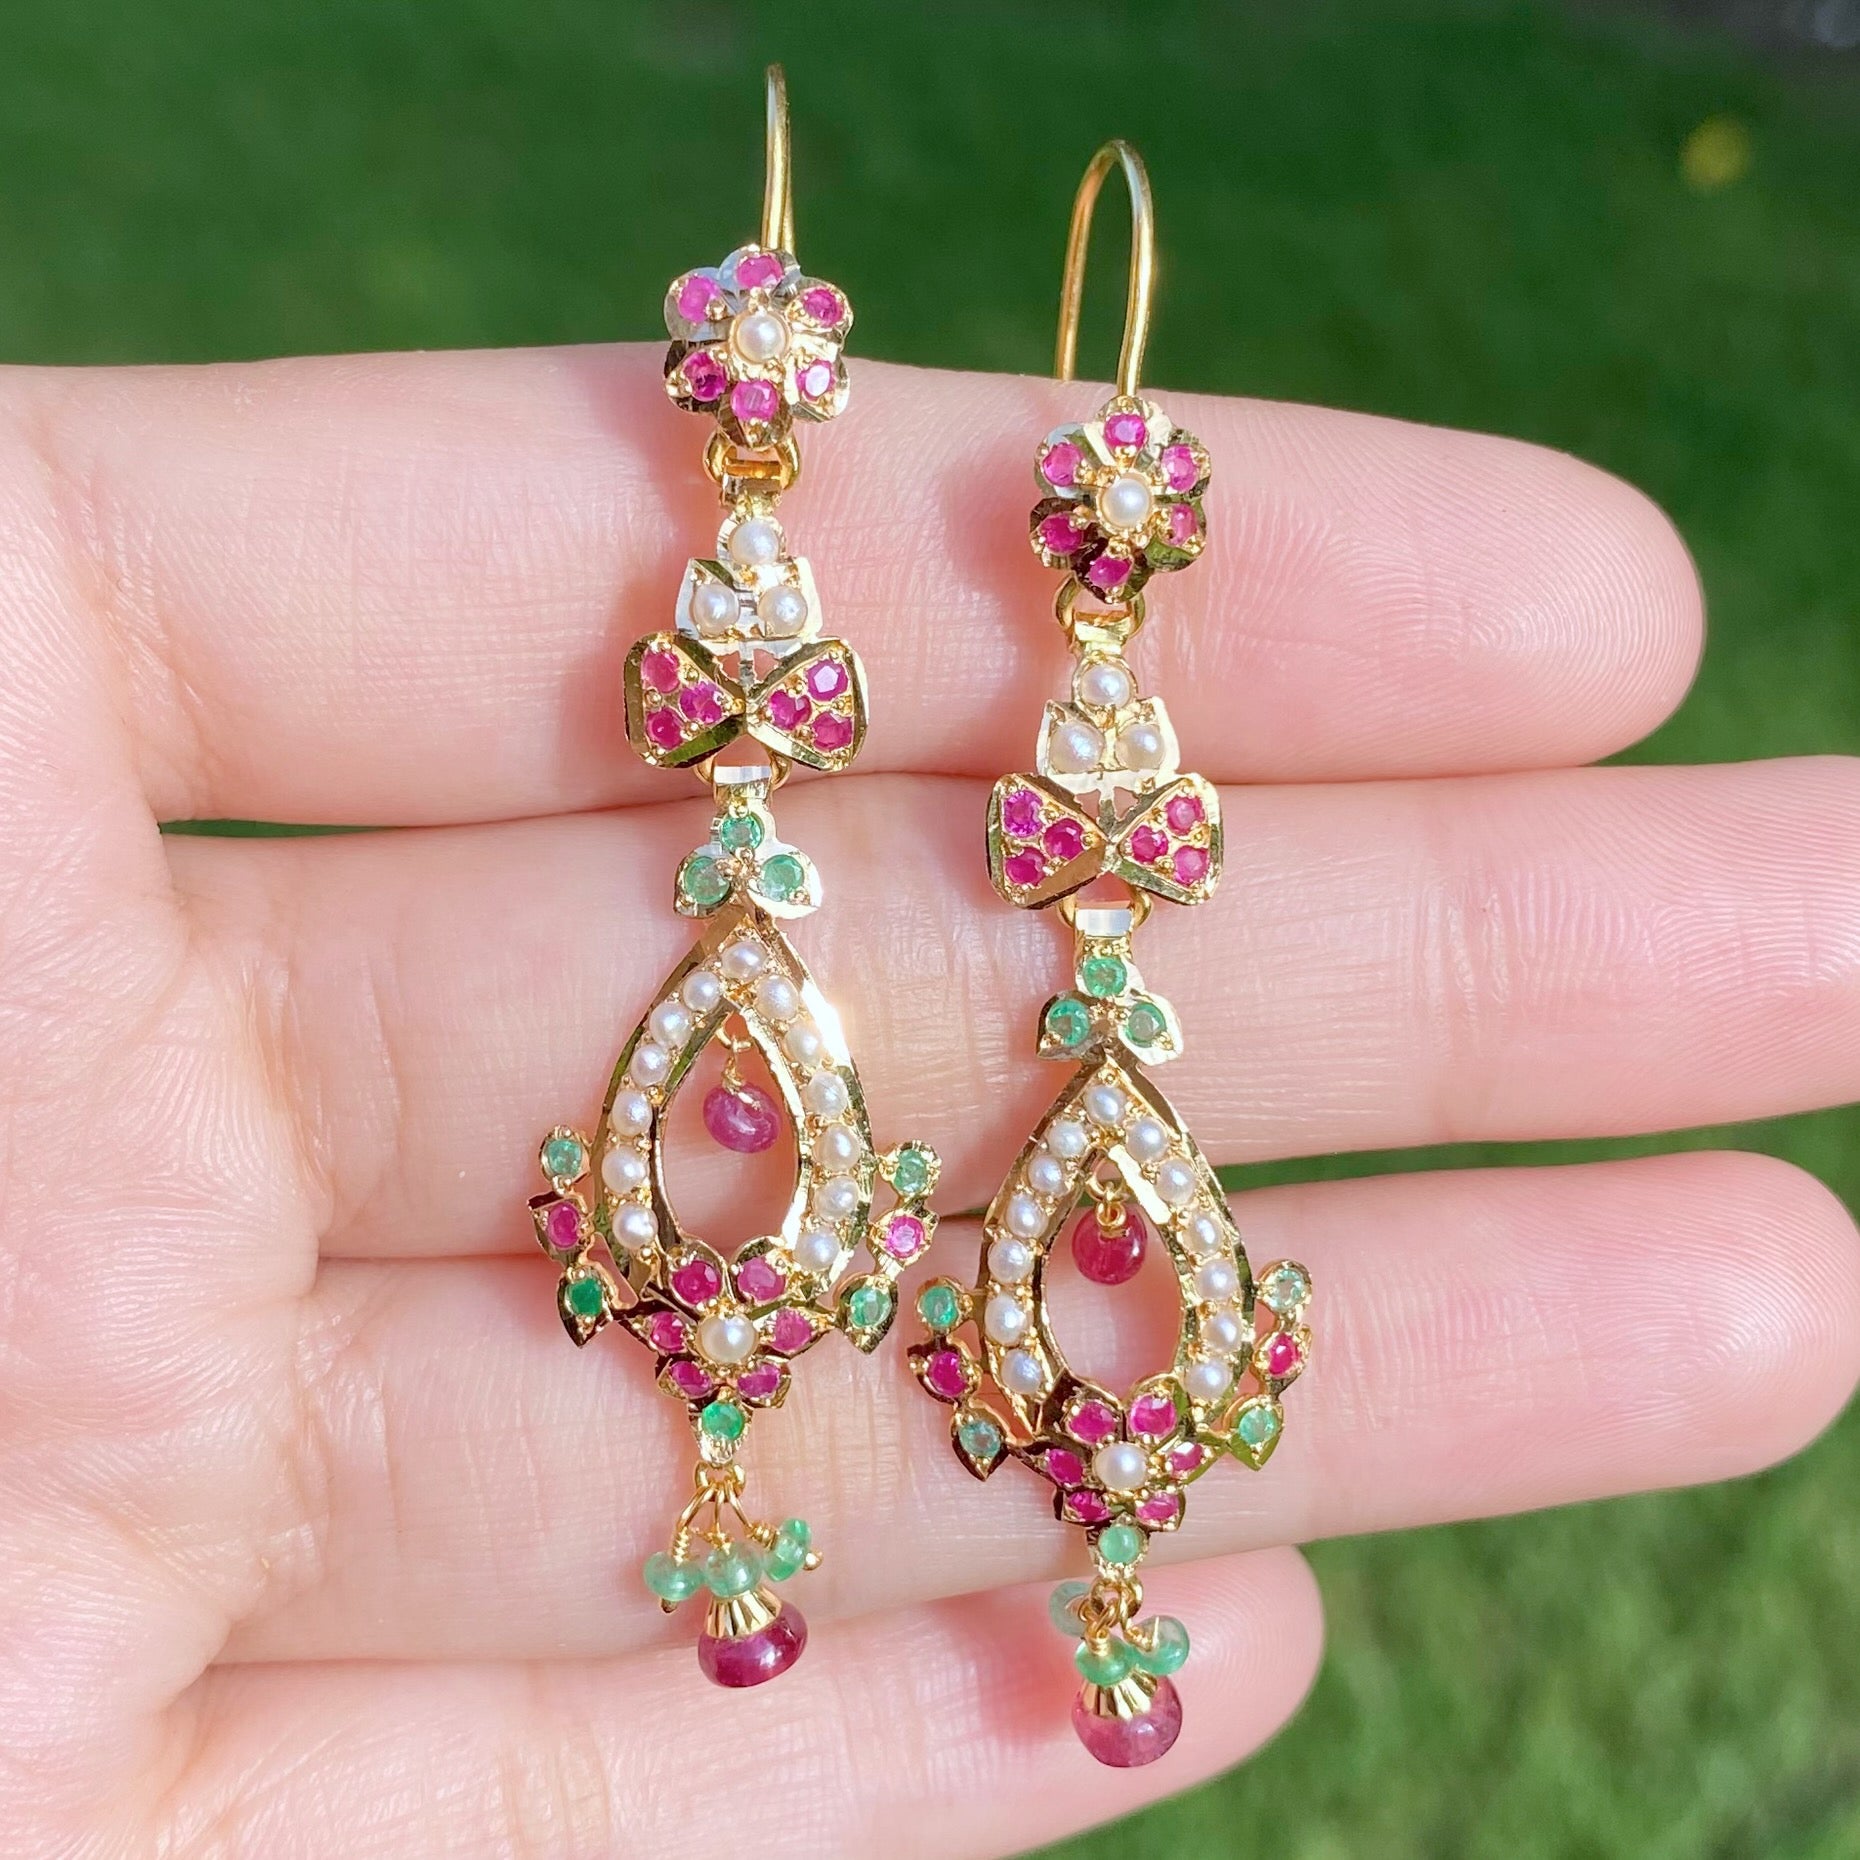 18k gold earrings with precious stones